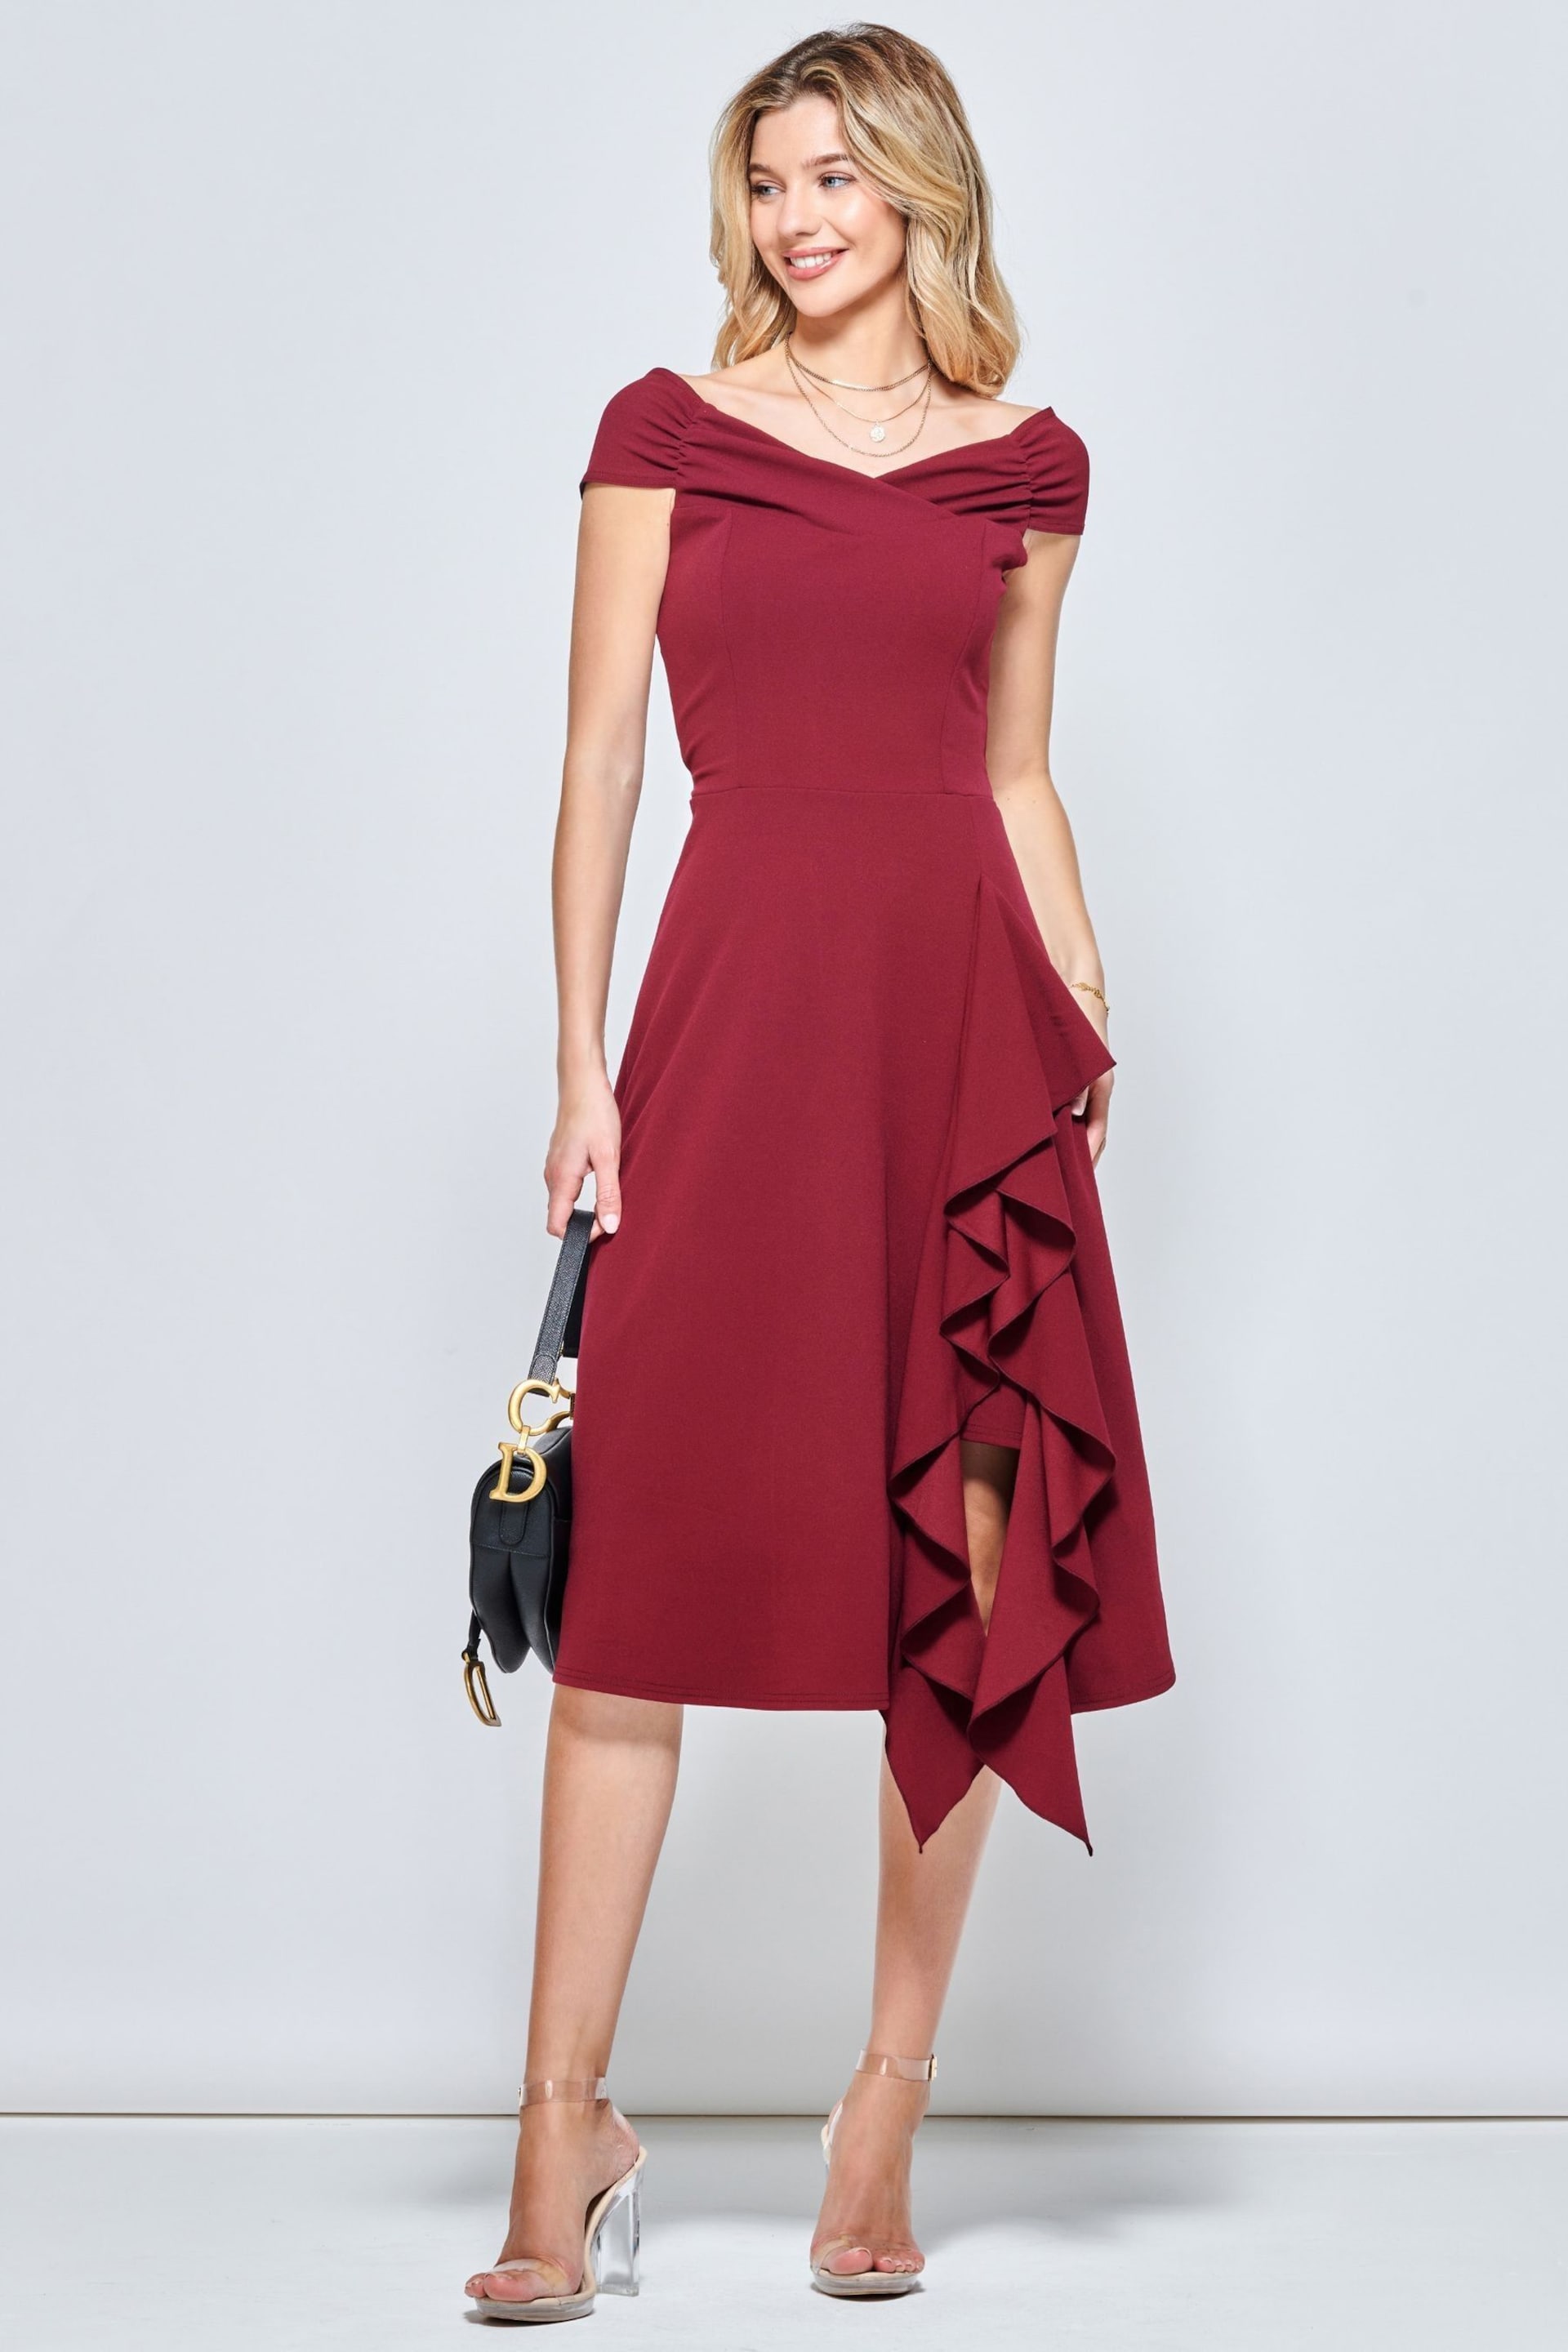 Jolie Moi Red Desiree Frill Fit & Flare Dress - Image 5 of 6